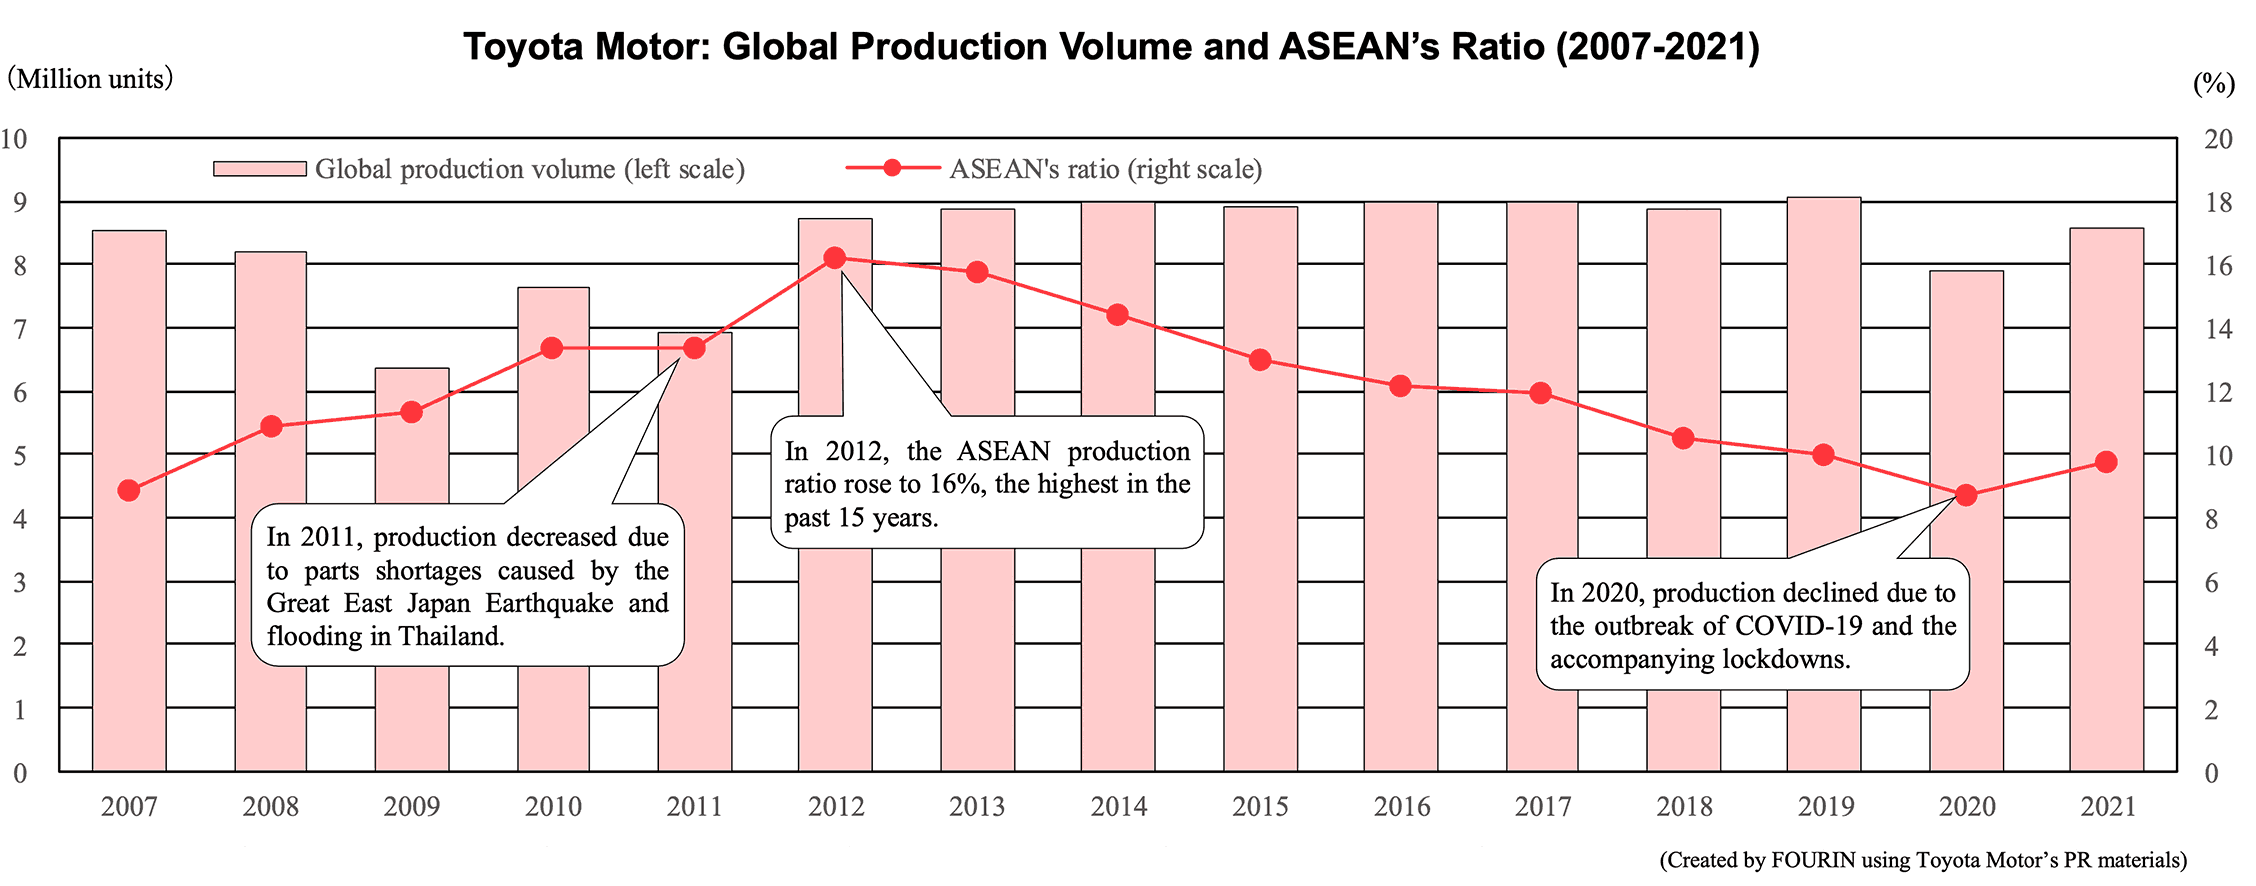 Toyota Motor: Global Production Volume and ASEAN’s Ratio (2007-2021)